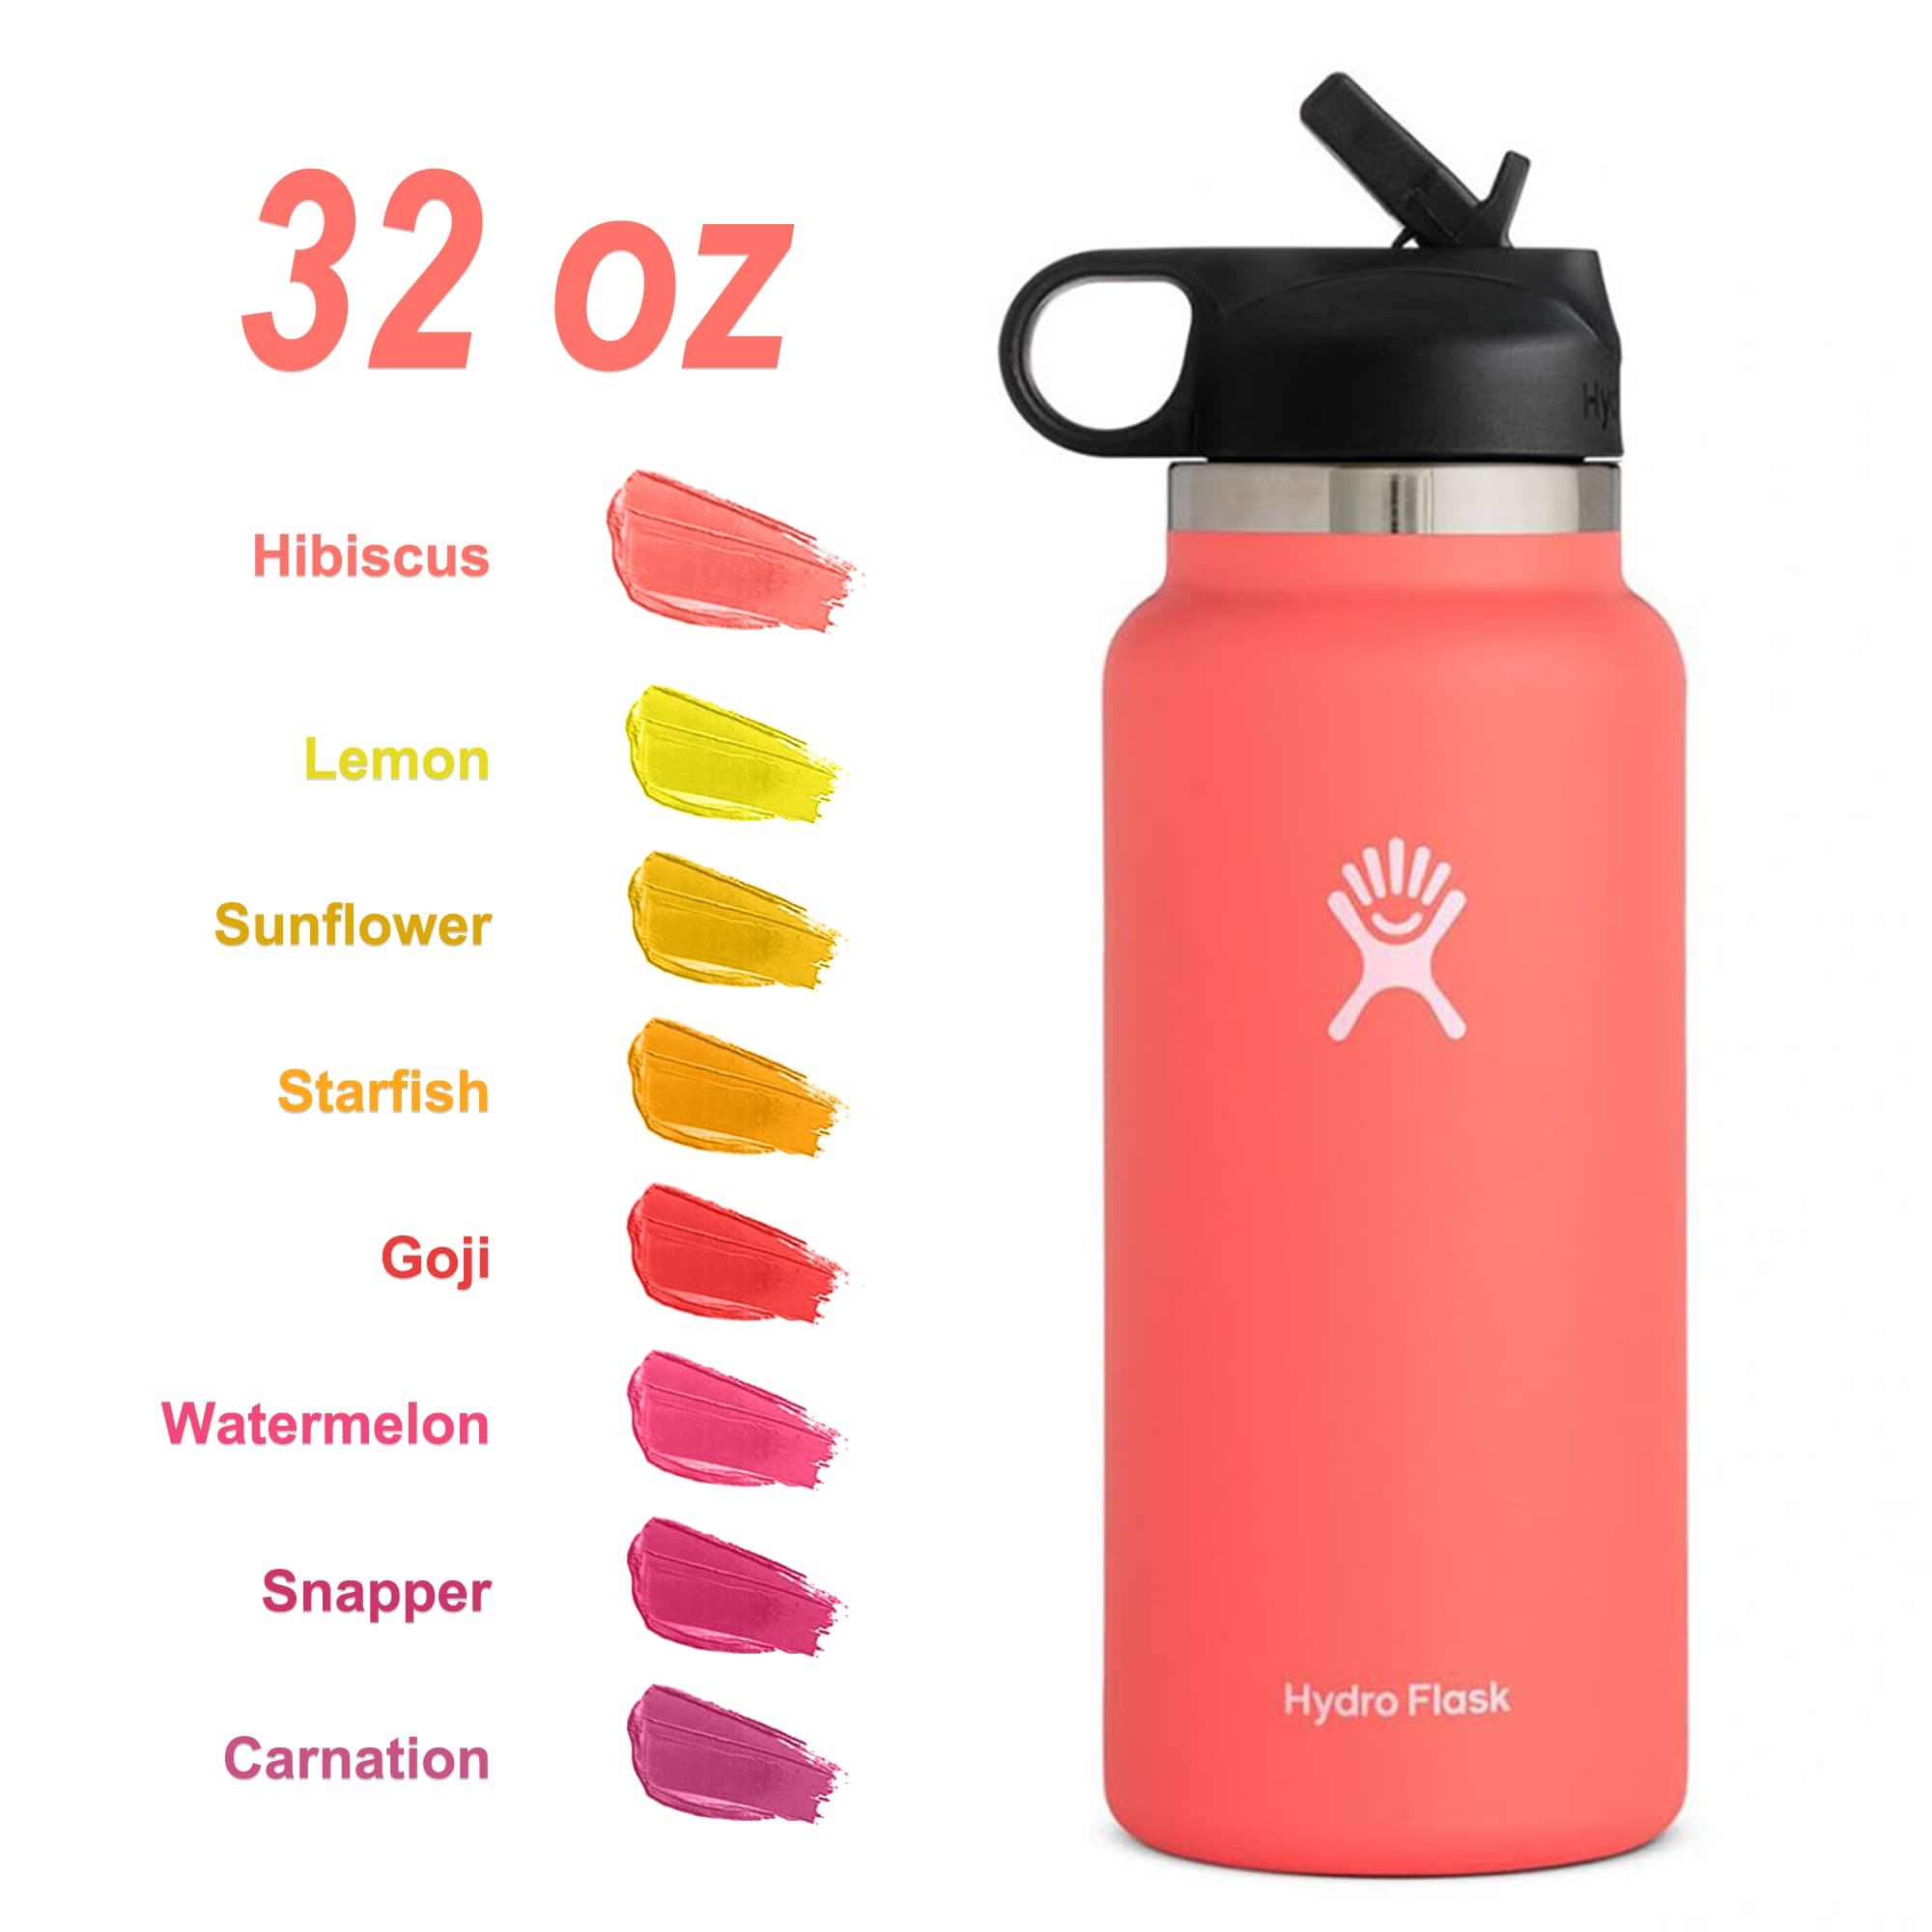 Hydro Flask Water Bottle - Stainless Steel & Vacuum Insulated - Wide Mouth  2.0 with Leak Proof Flex Cap - 32 oz, Hibiscus